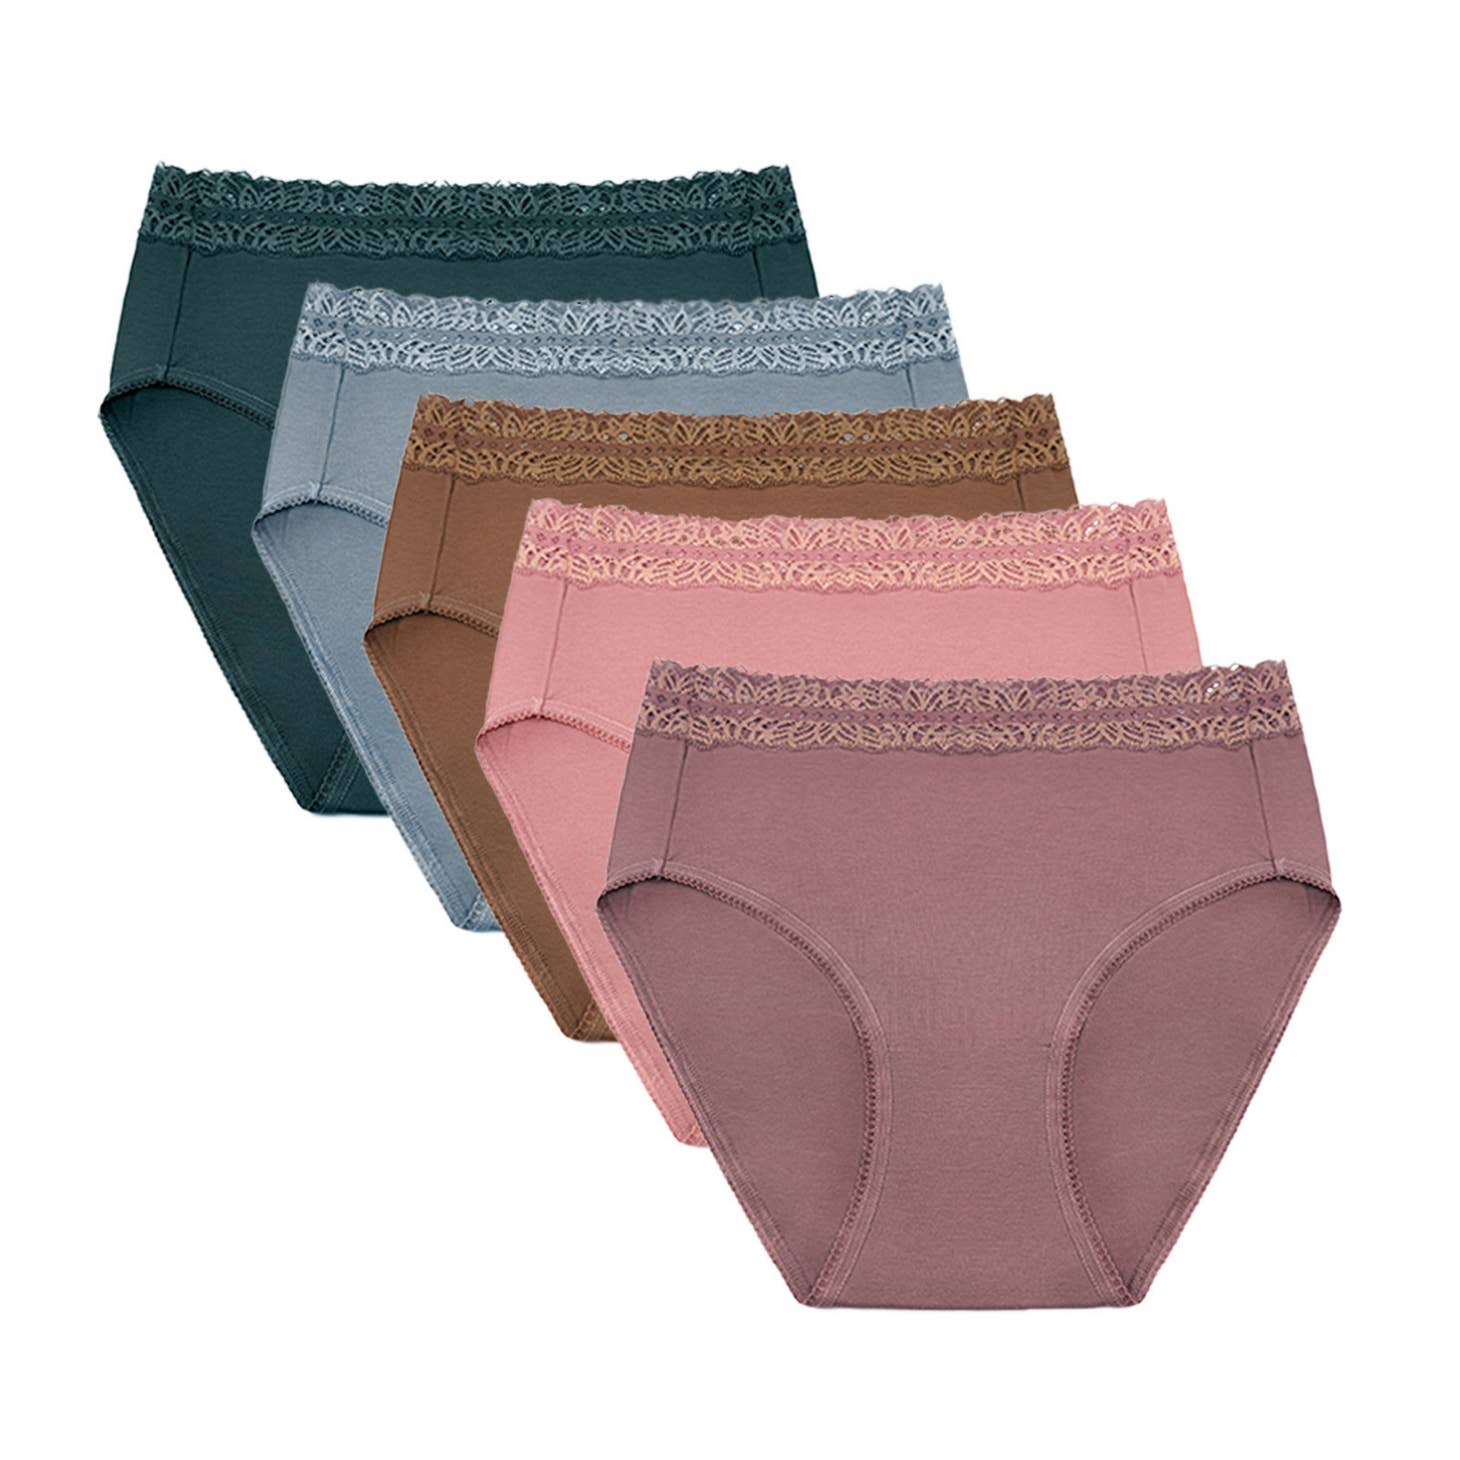  Cutie Undies - Disposable Period Panties - Two (2) Disposable  100% Breathable Cotton Underwear : Clothing, Shoes & Jewelry